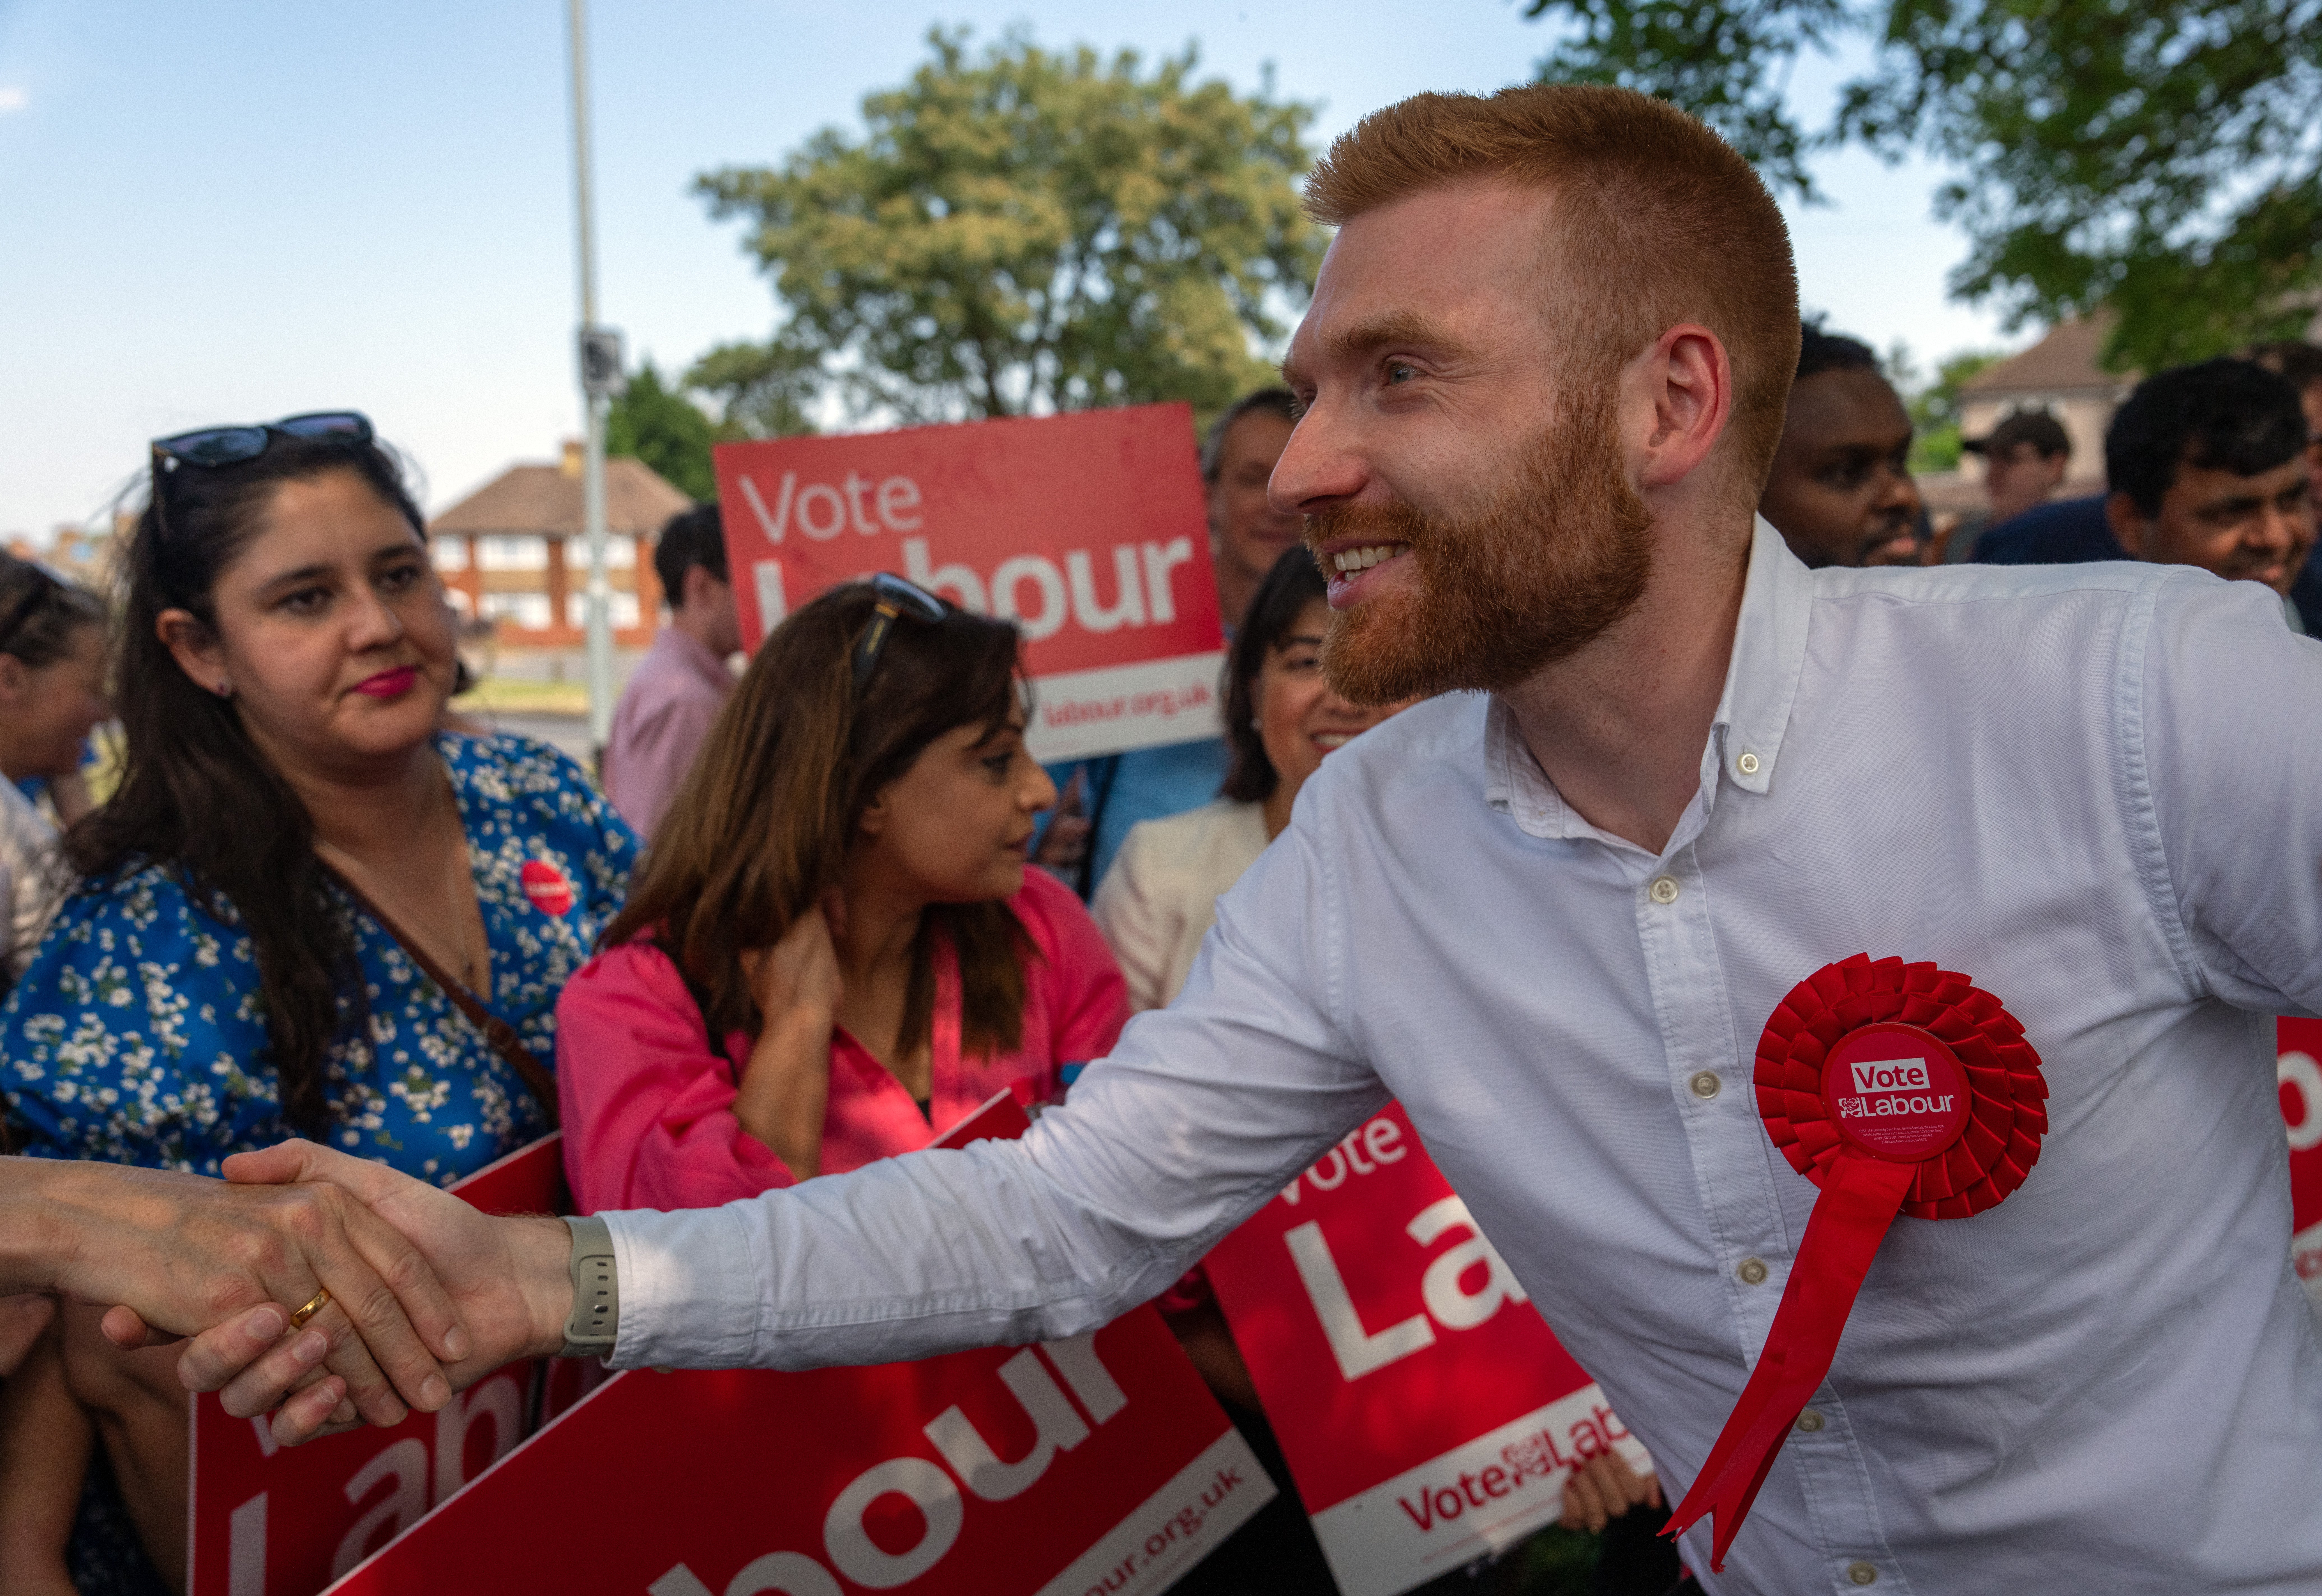 Danny Beales is the Labour candidate for the Uxbridge and South Ruislip by-election